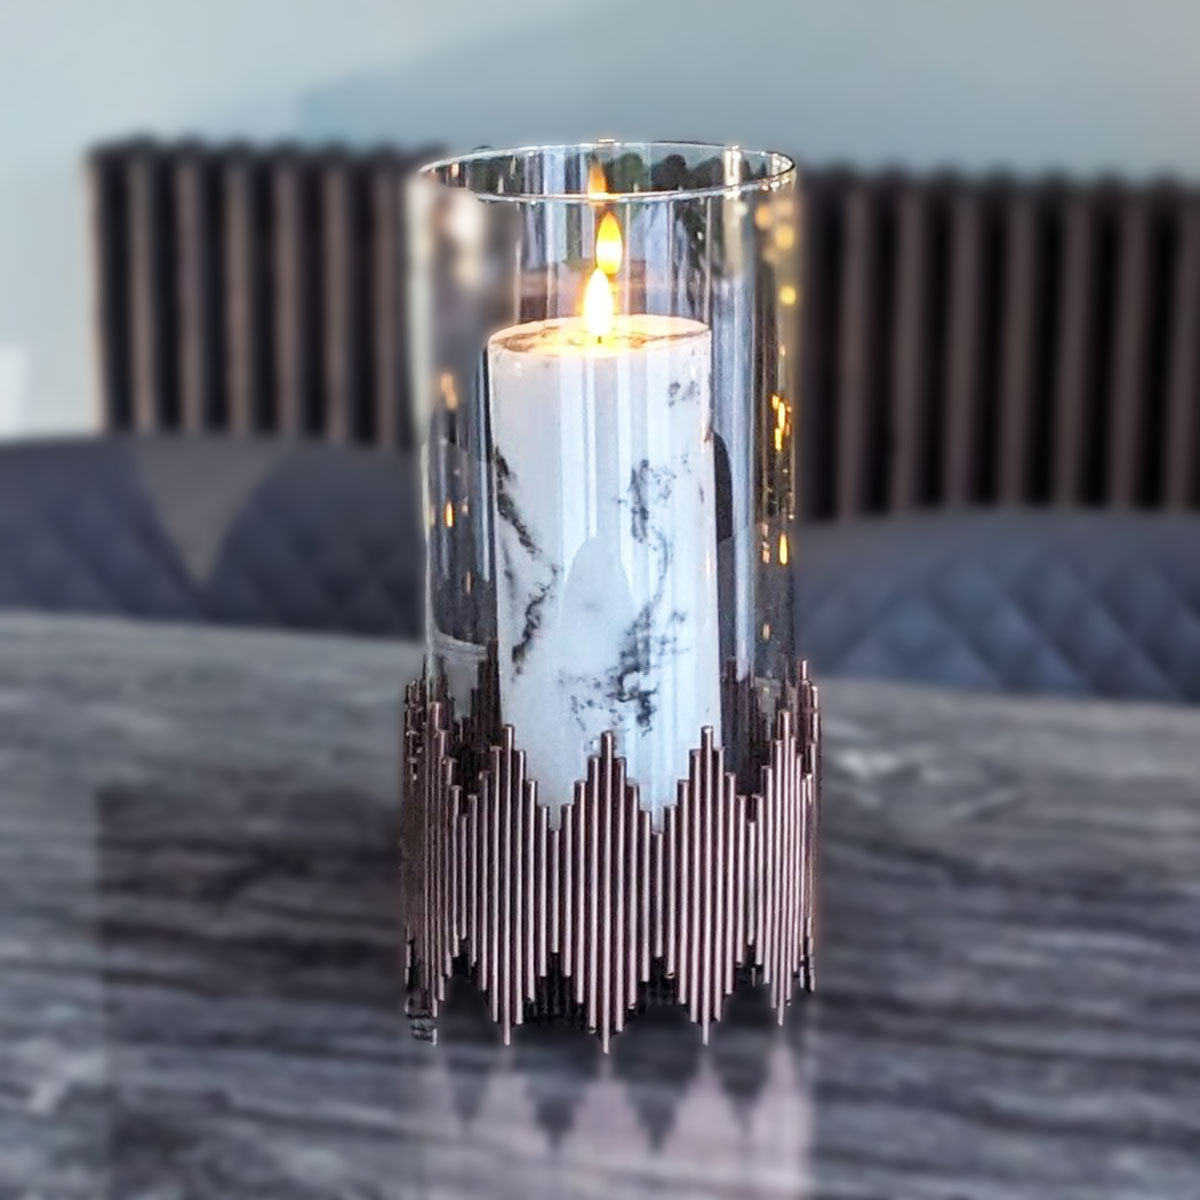 Marble-Effect LED Pillar Candle with Flickering Flame 23x9cm